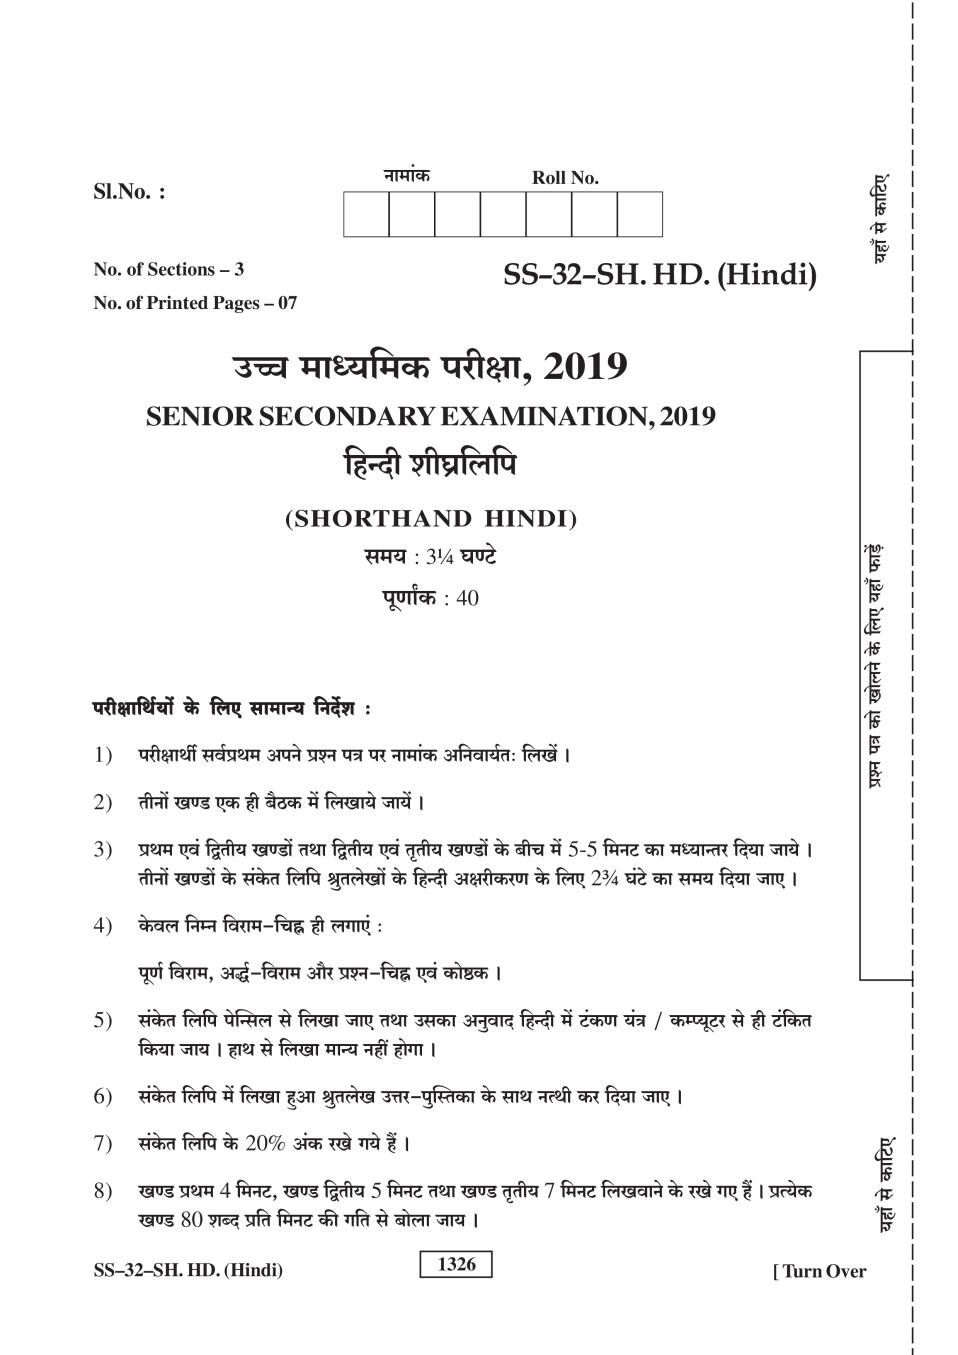 Rajasthan Board 12th Class Shorthand Hindi Question Paper 2019 - Page 1